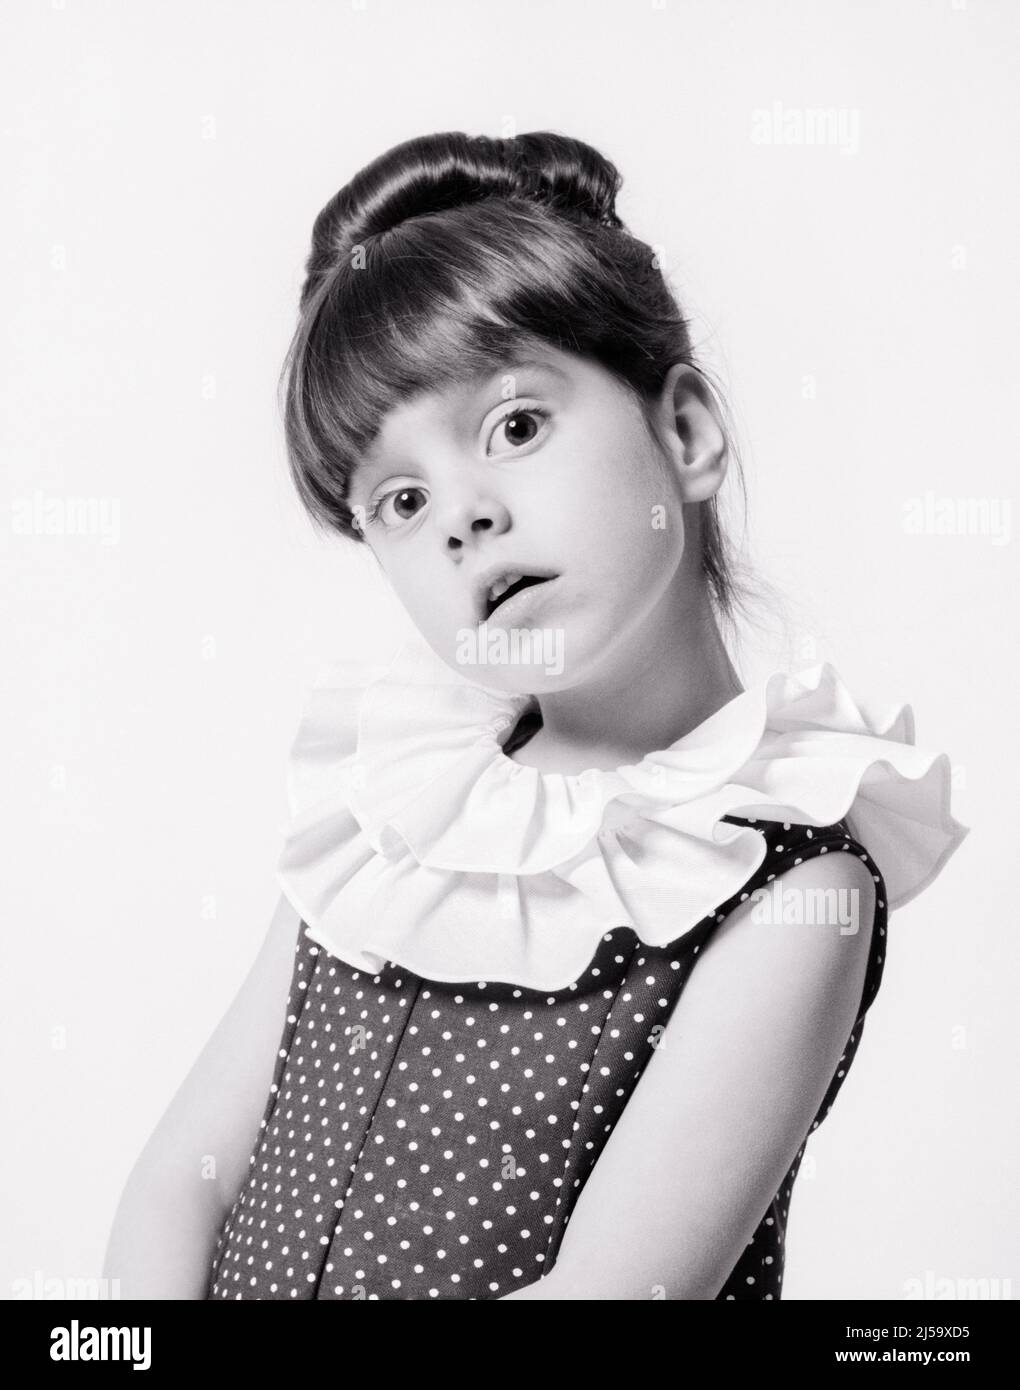 1960s ADORABLE BRUNETTE LITTLE GIRL LOOKING AT CAMERA QUESTIONING UNCERTAIN GAZE HAIR IN UPDO POLKA DOT DRESS HAS RUFFLED COLLAR - j13245 HAR001 HARS HALF-LENGTH B&W WIDE EYE CONTACT BRUNETTE DOT BUG-EYED POLKA UPDO STYLISH PLEASANT WIDE-EYED AGREEABLE CHARMING GAZE JUVENILES LOVABLE PLEASING POSE POSED QUESTIONING RUFFLED STARTLED ADORABLE APPEALING ATTITUDE BANGS BLACK AND WHITE CAUCASIAN ETHNICITY HAR001 OLD FASHIONED UNCERTAIN Stock Photo